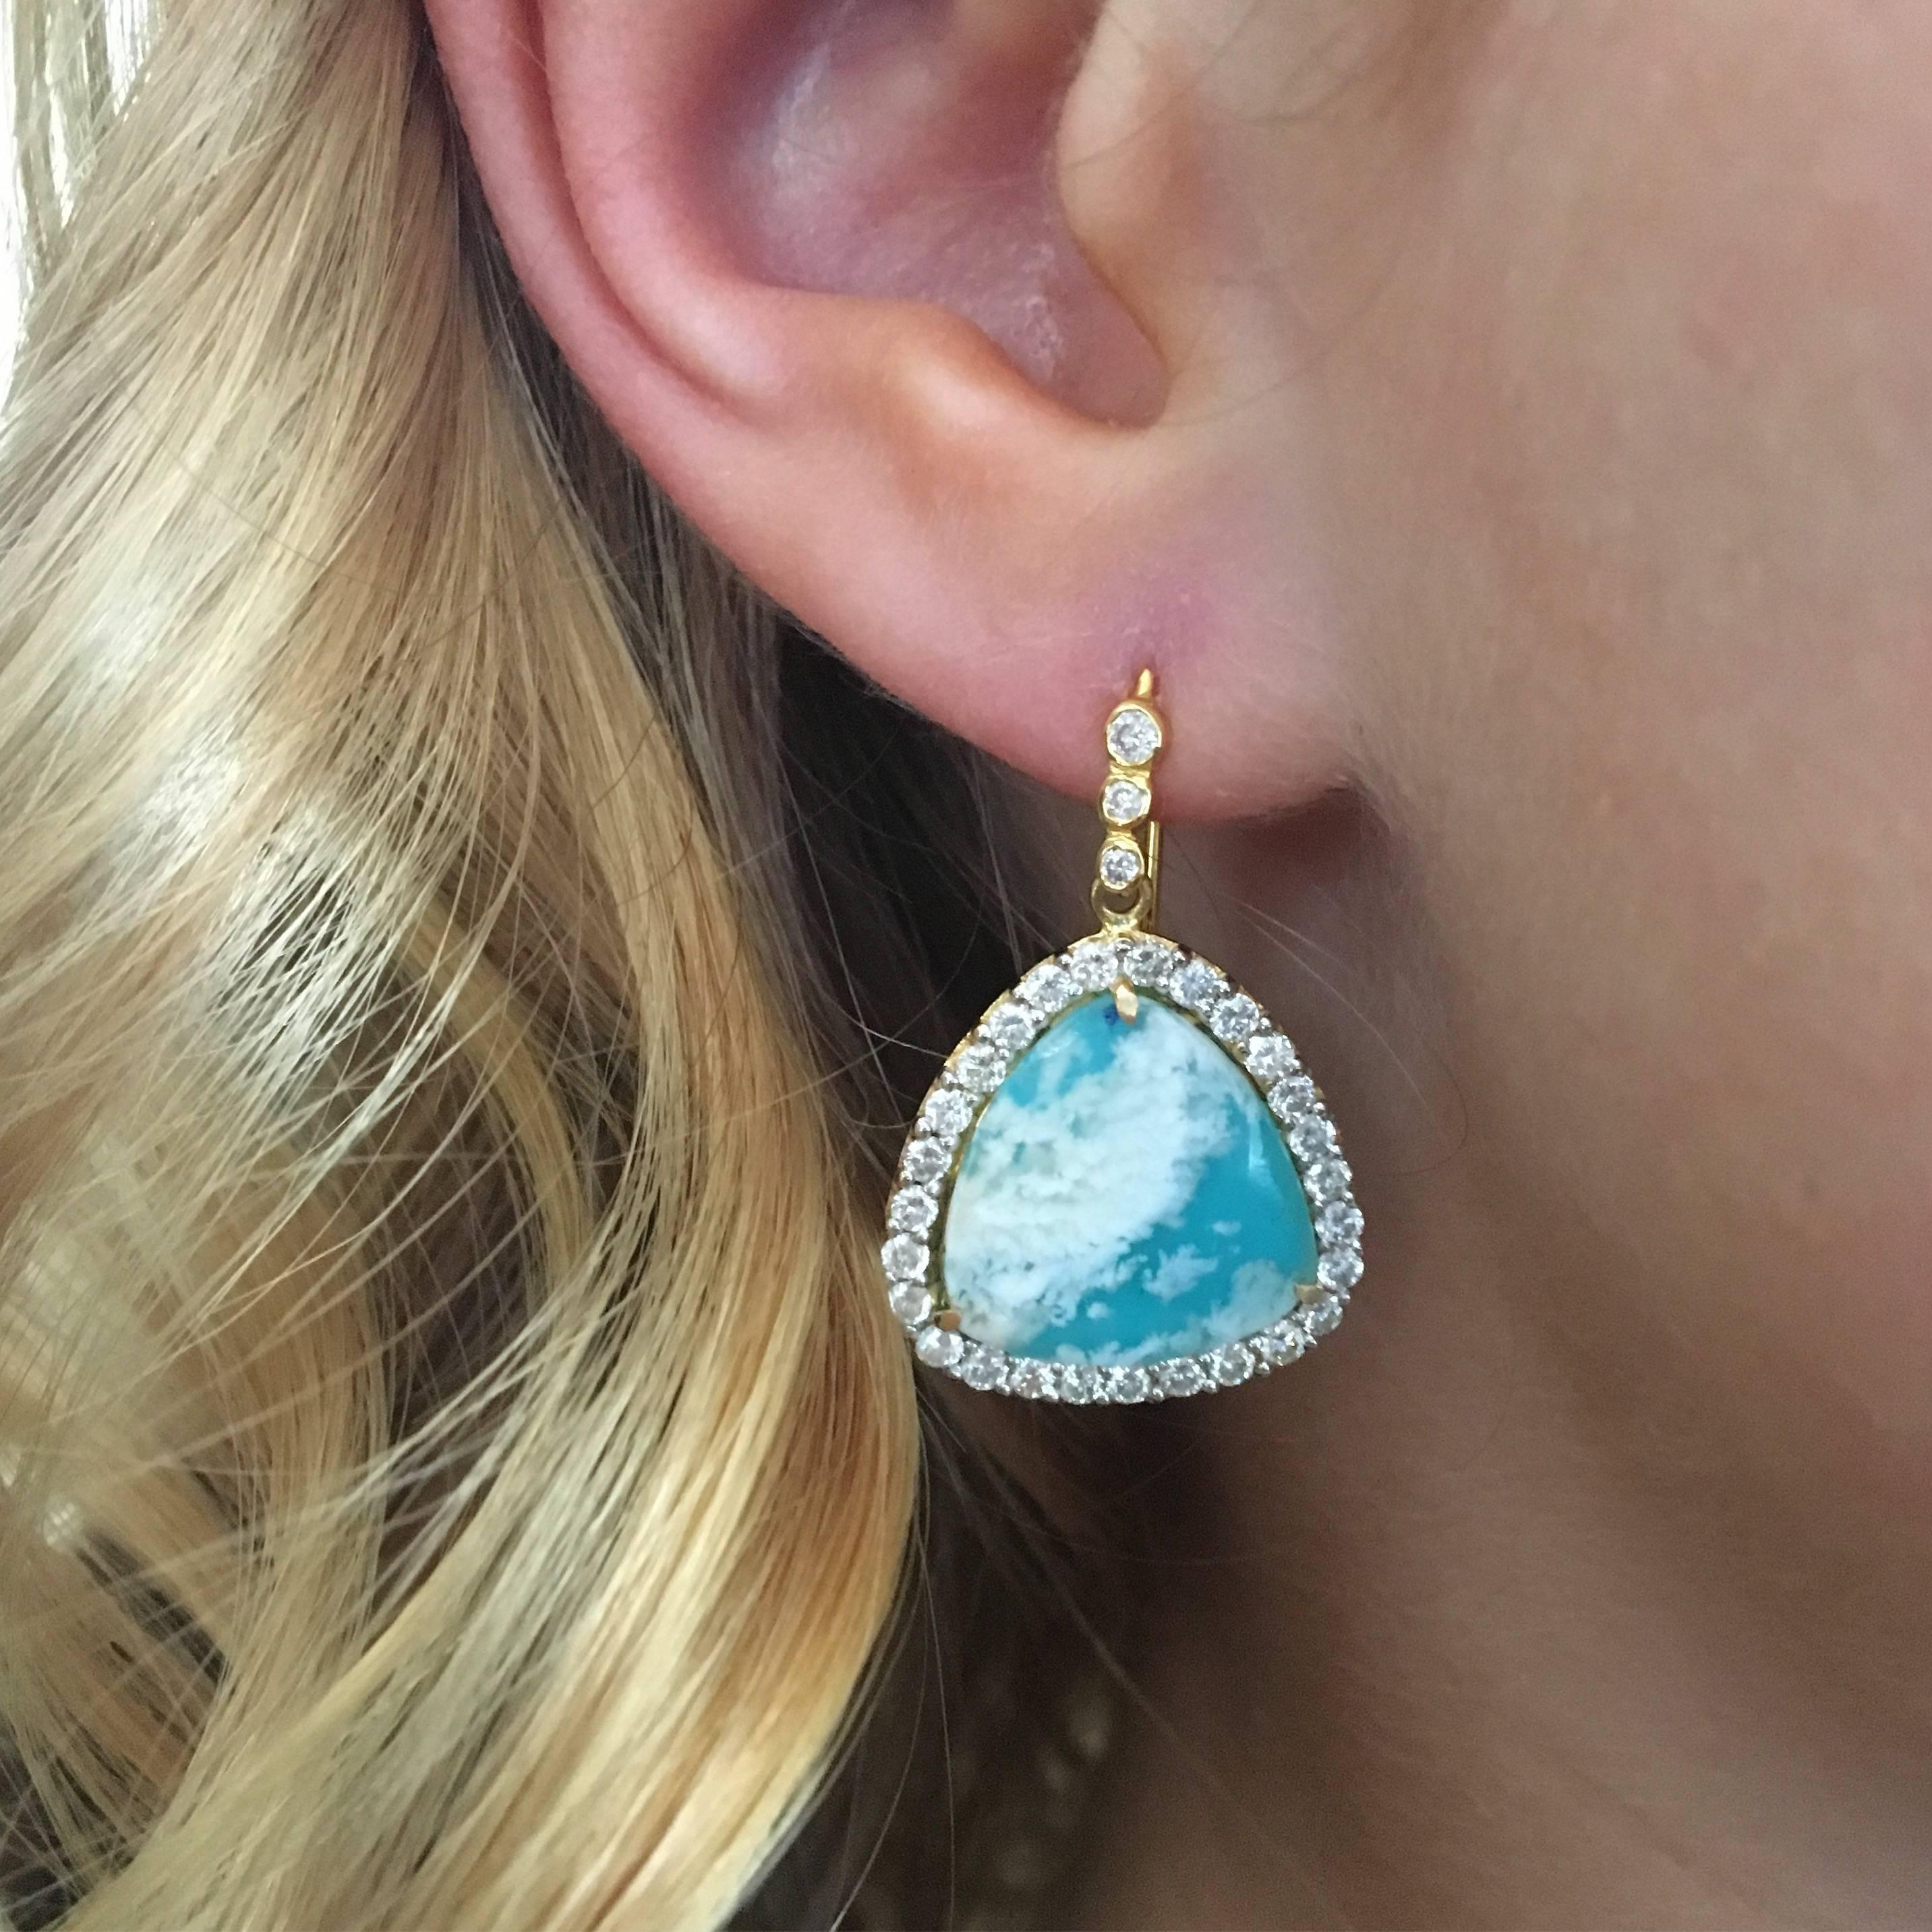 These earrings are truly one of a kind. With translucent sea agate placed perfectly on top of turquoise, these earrings have the appearance of floating clouds in a gorgeous blue sky. White Diamonds in micro pave surround these unusual stones in 18kt